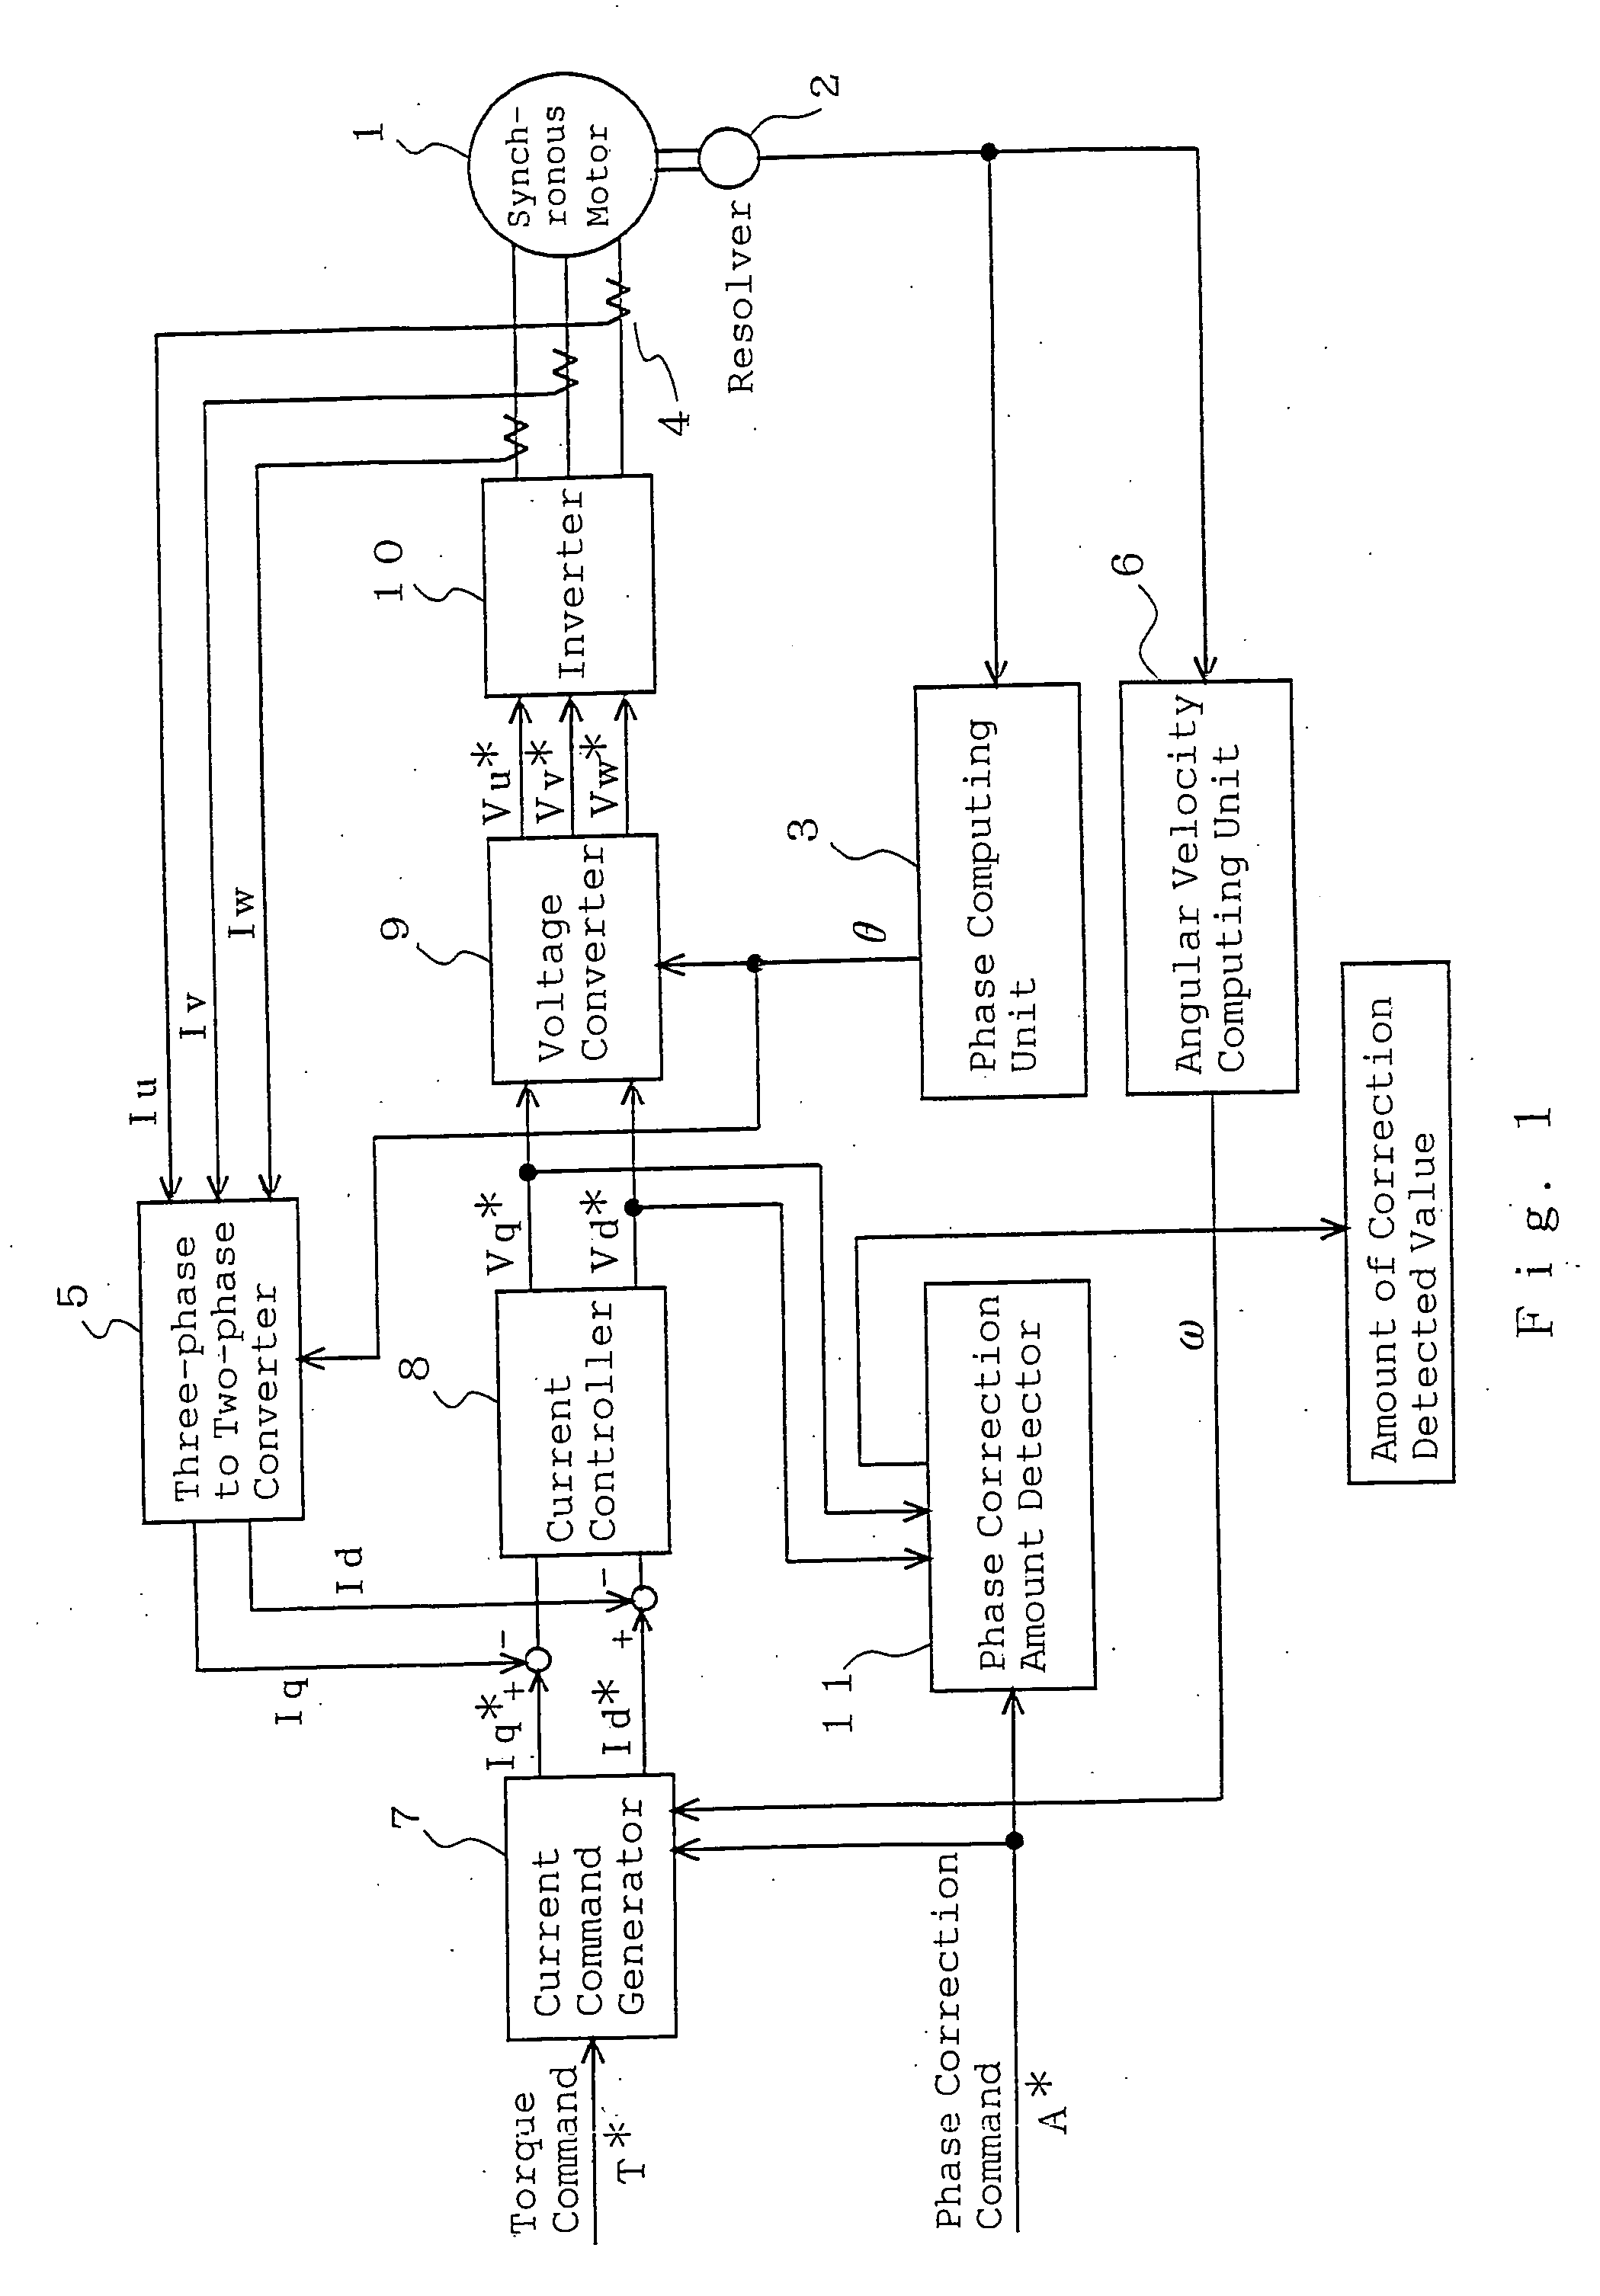 Method for detecting/adjusting synchronous motor rotor position